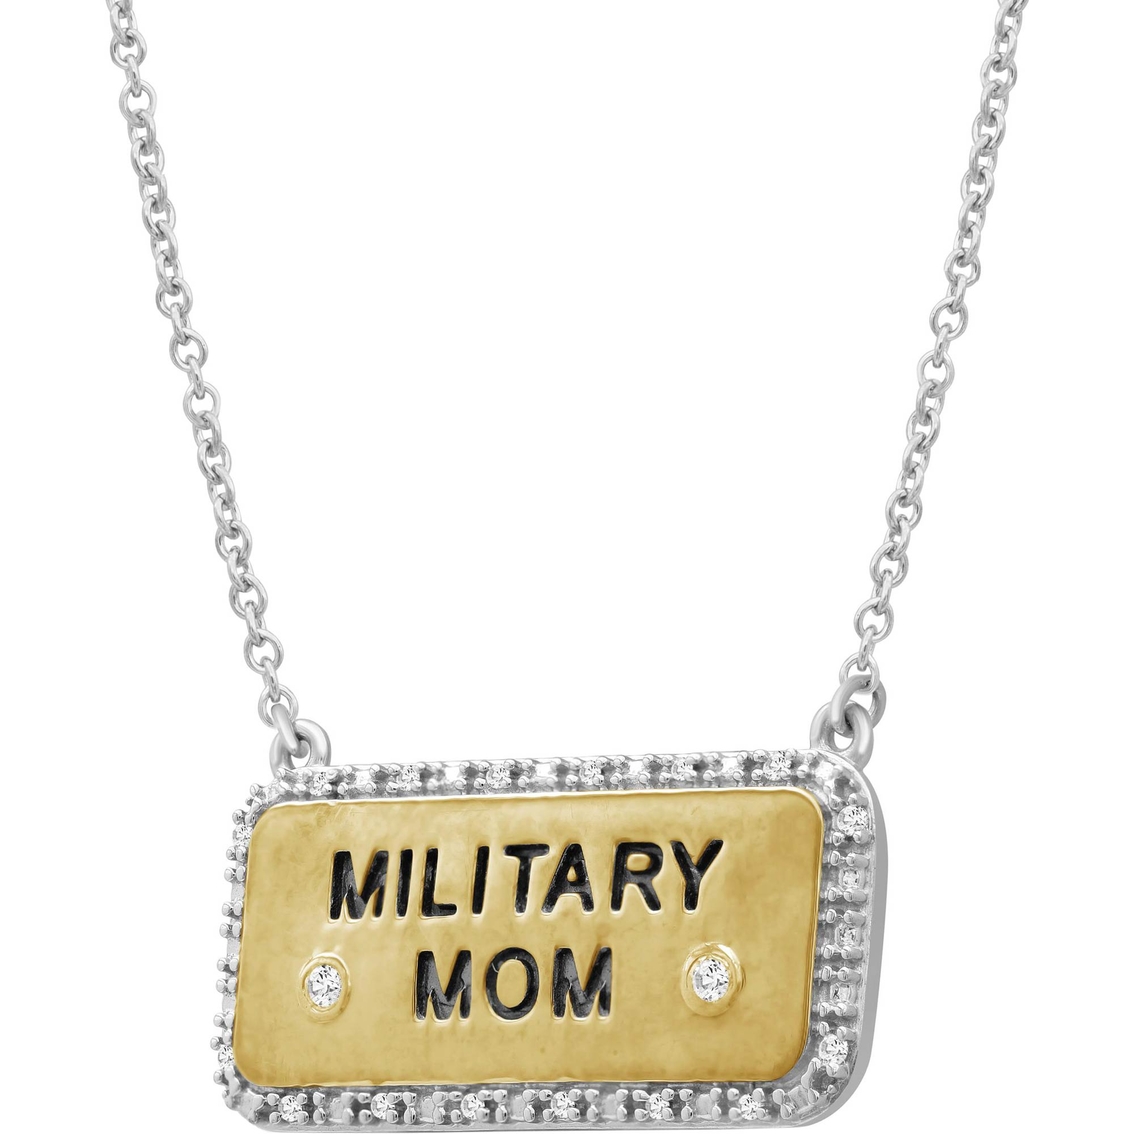 She Shines 14K Over Sterling Silver 1/10 CTW White Diamond Military Mom Necklace - Image 2 of 4